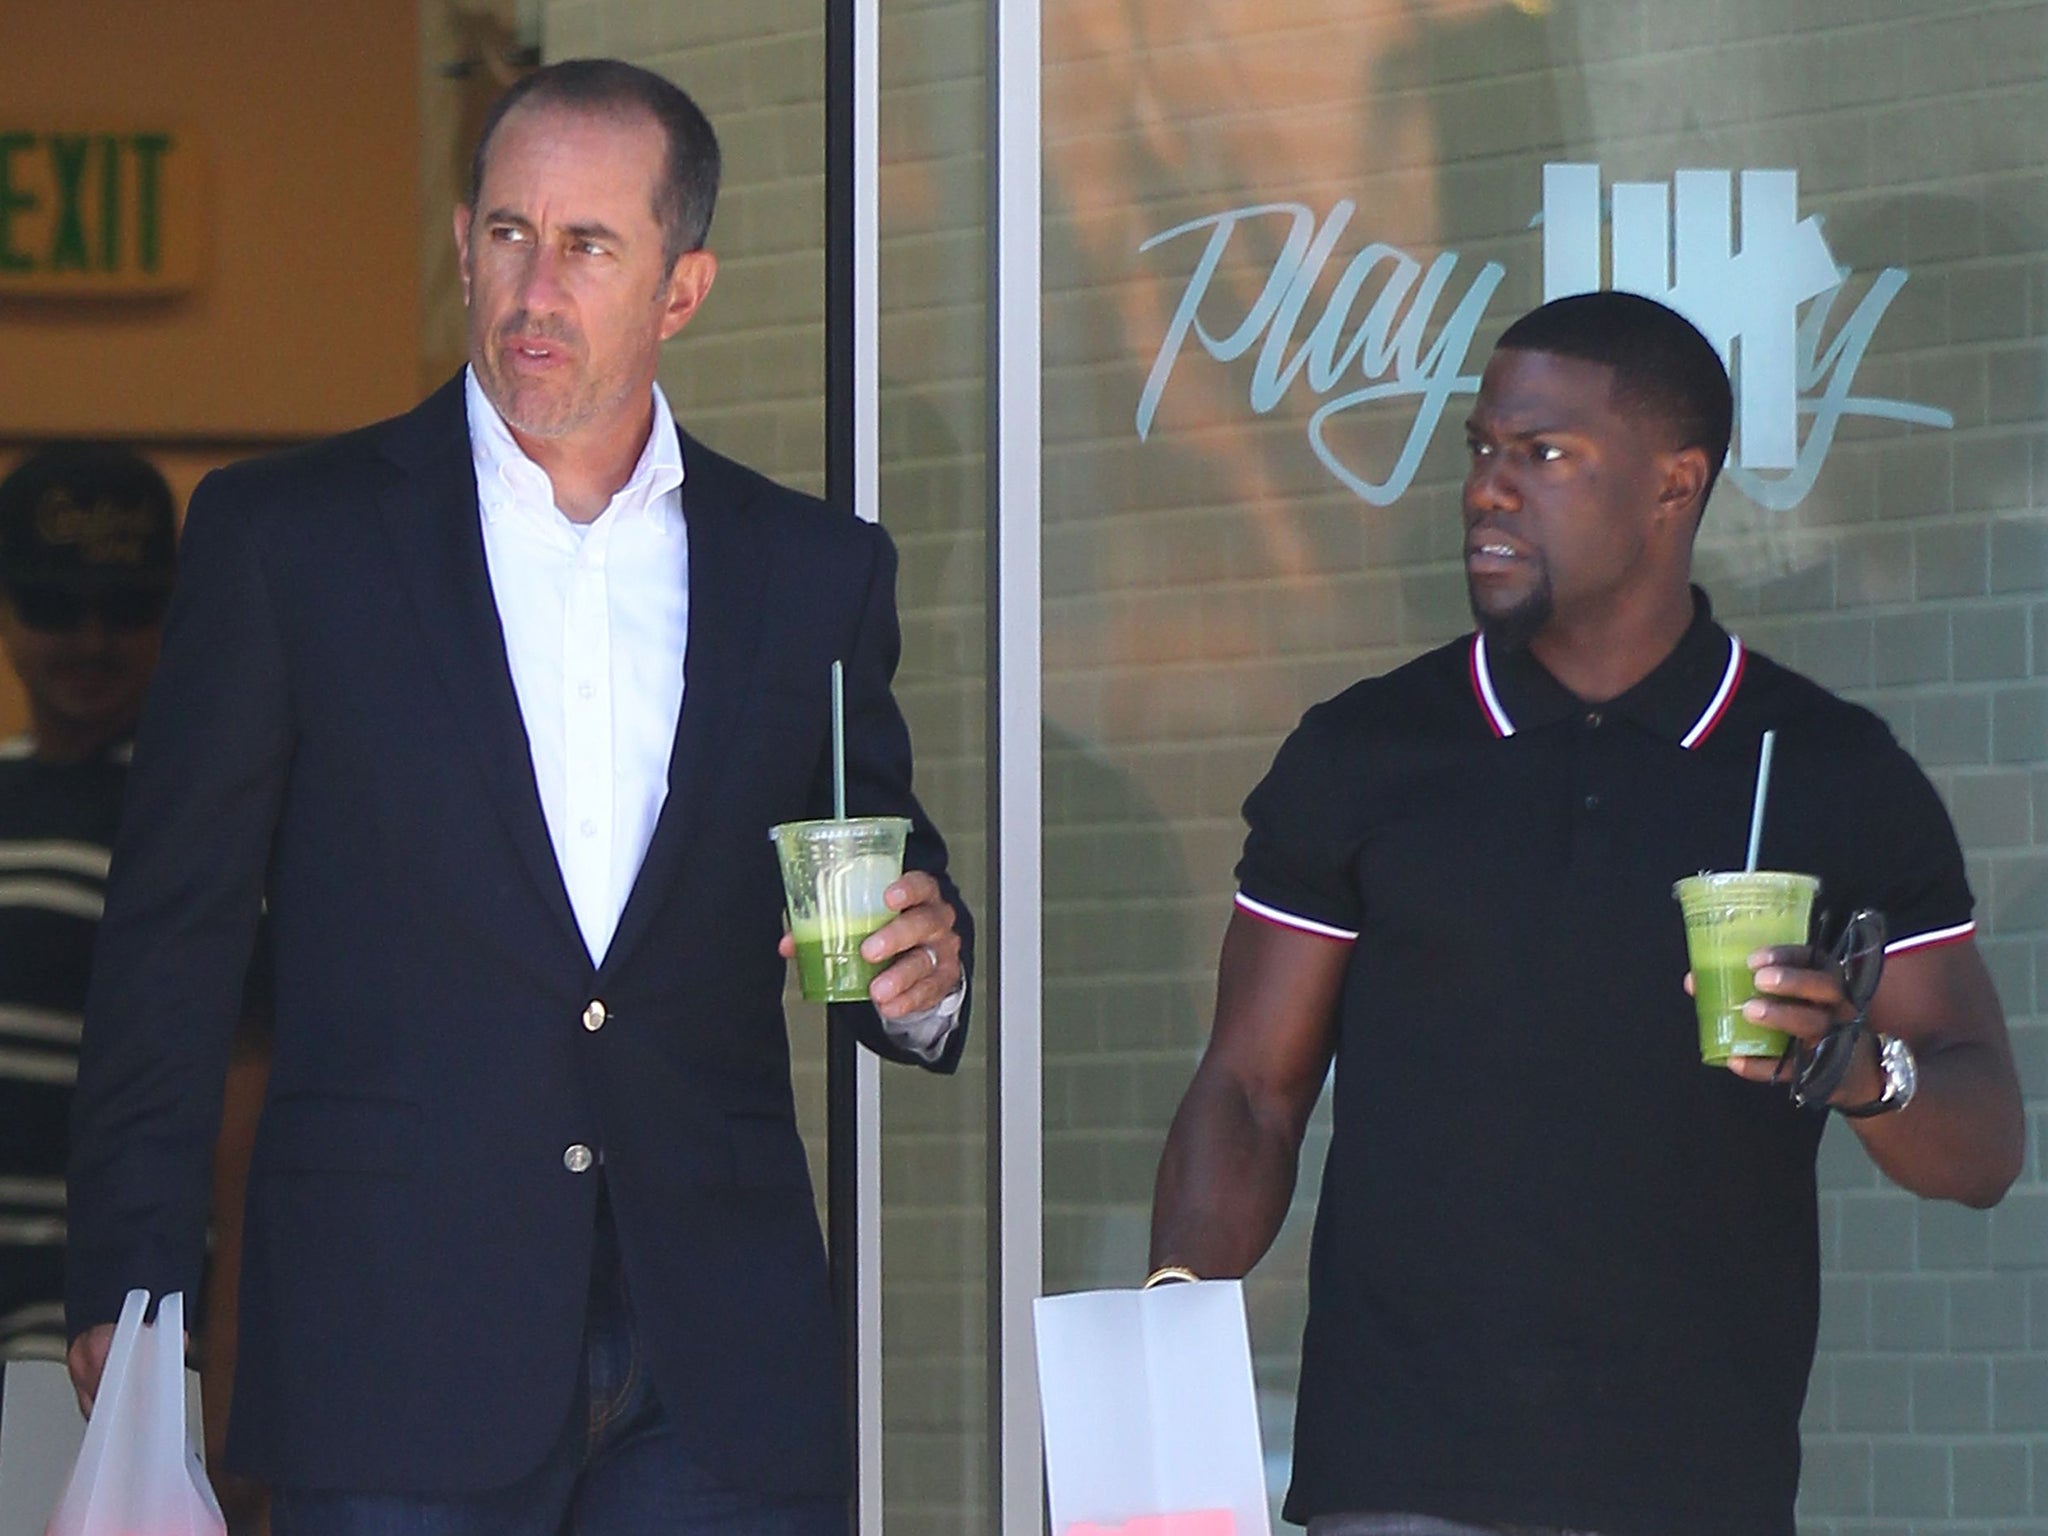 Jerry Seinfeld and Kevin Hart go shopping in an episode of ‘Comedians in Cars Getting Coffee’